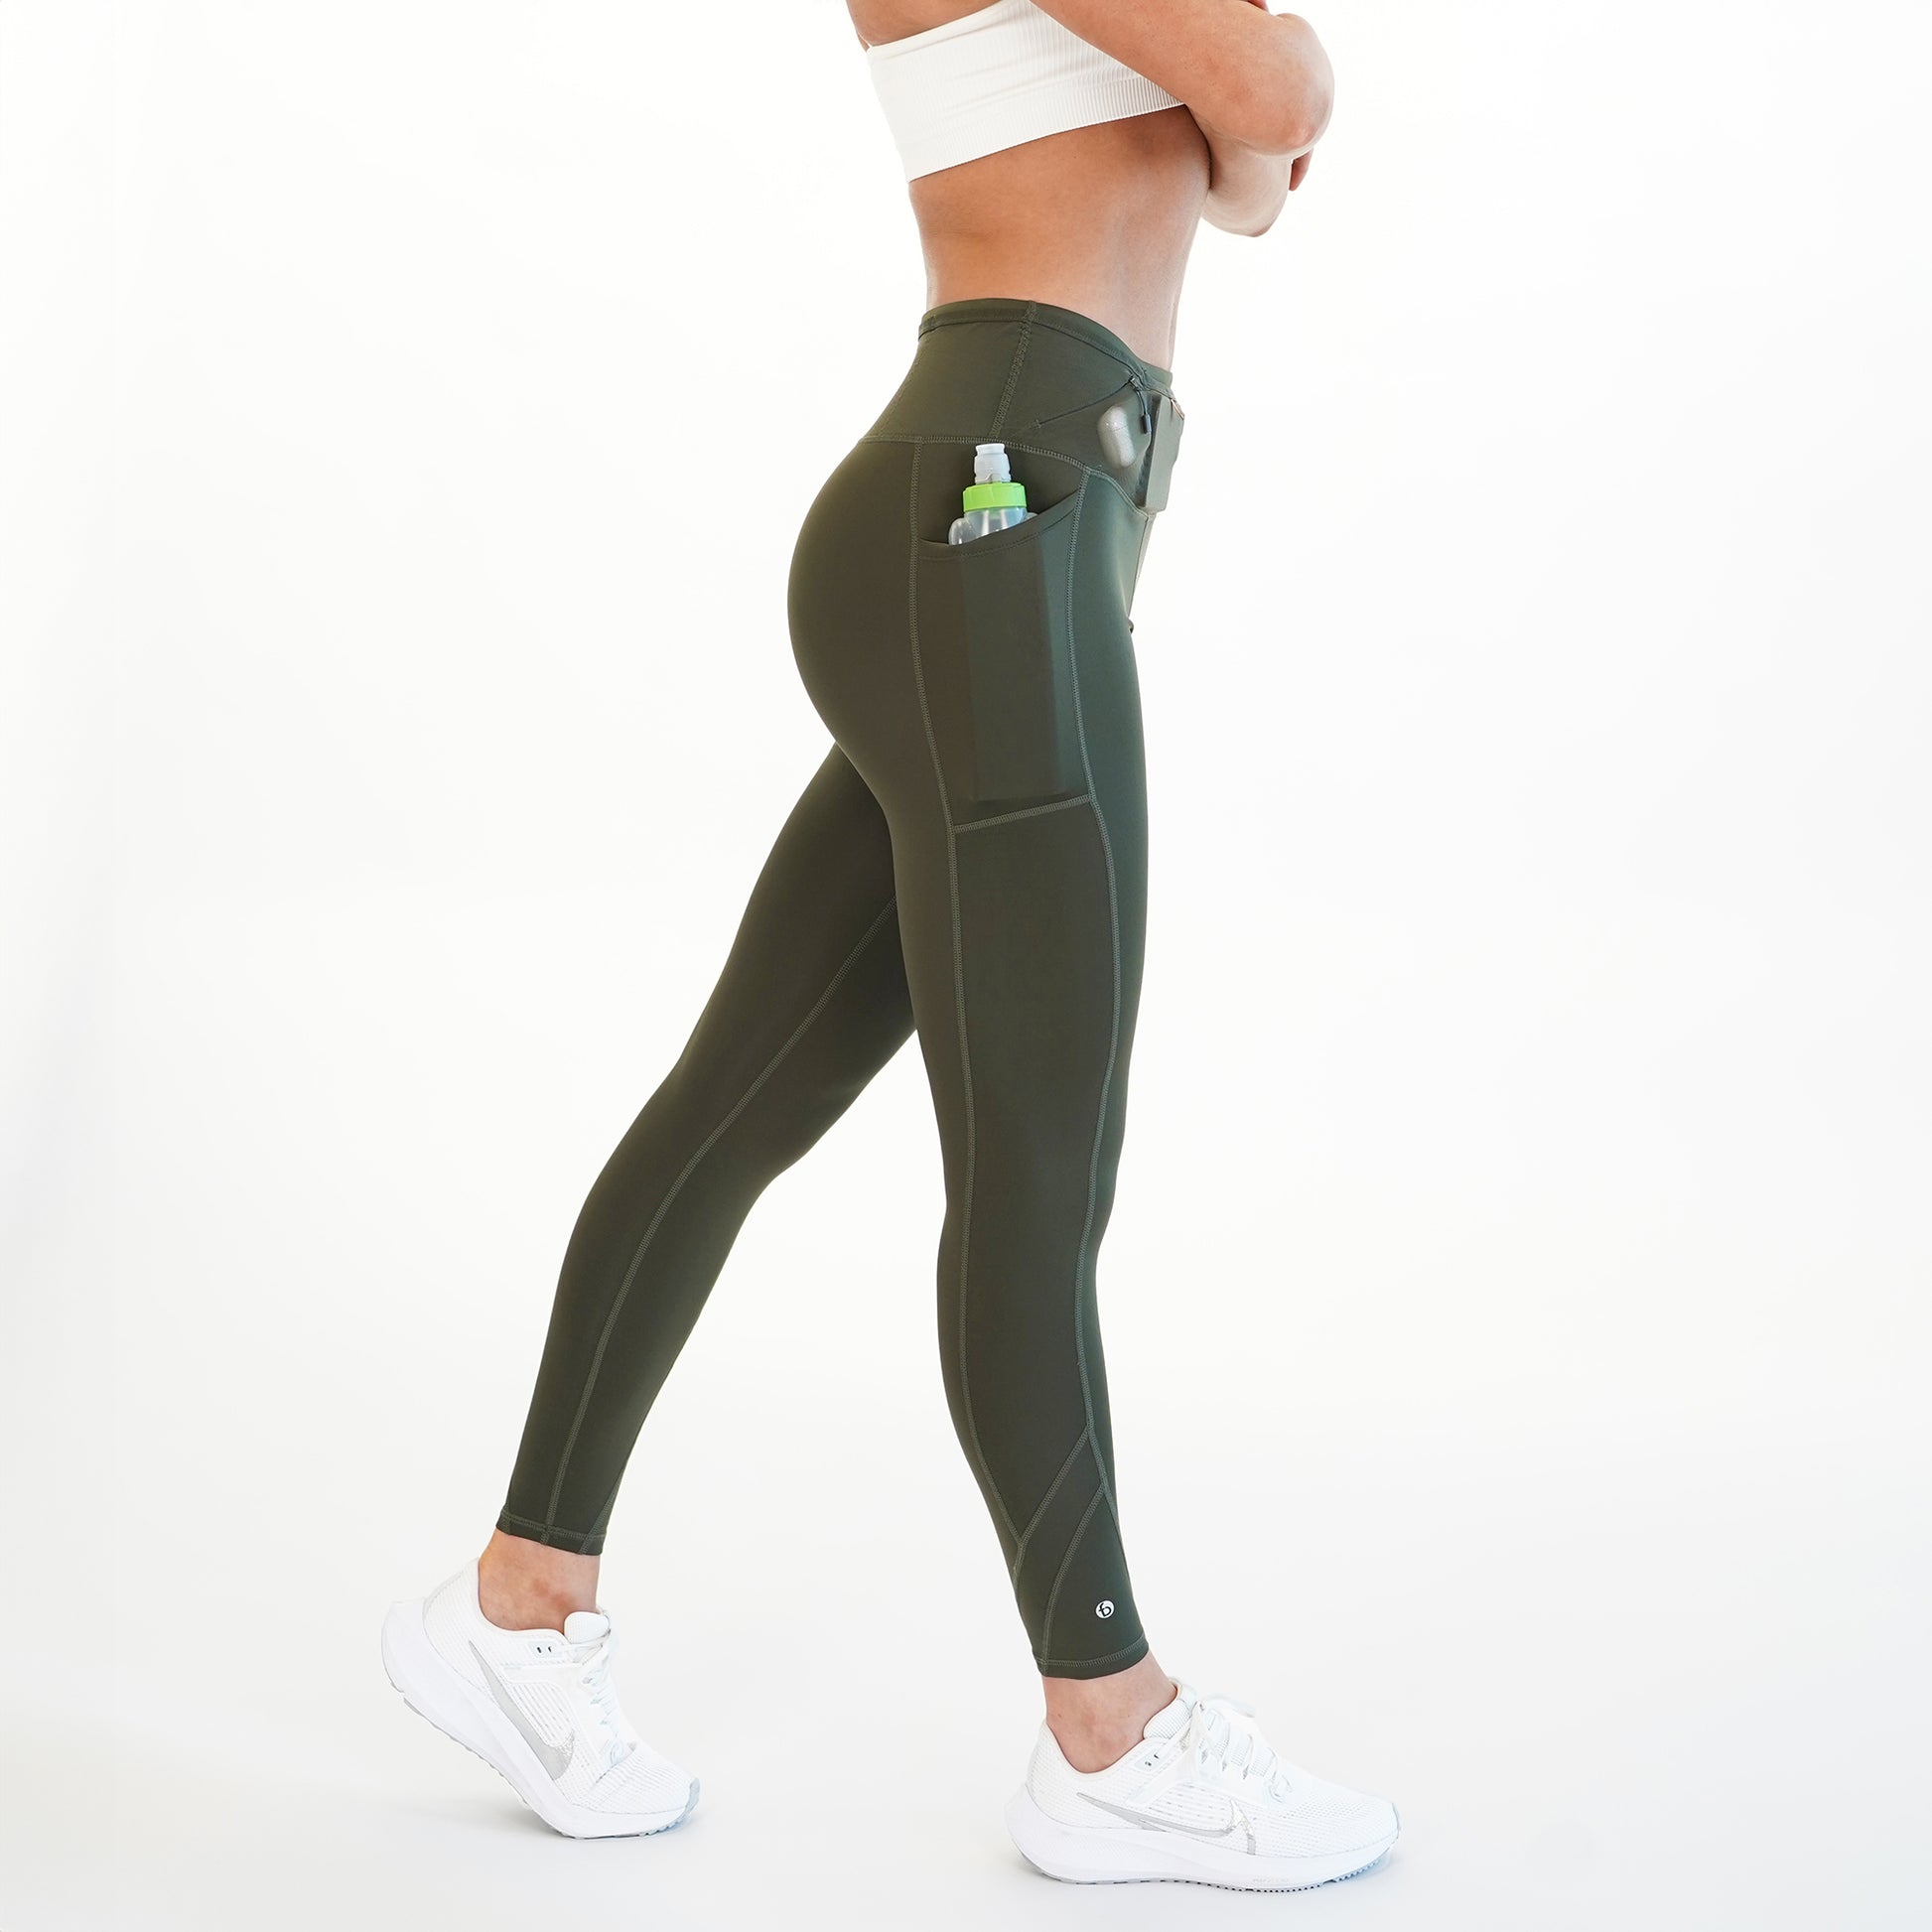 Women's Air Mid-Weight Fitness Leggings